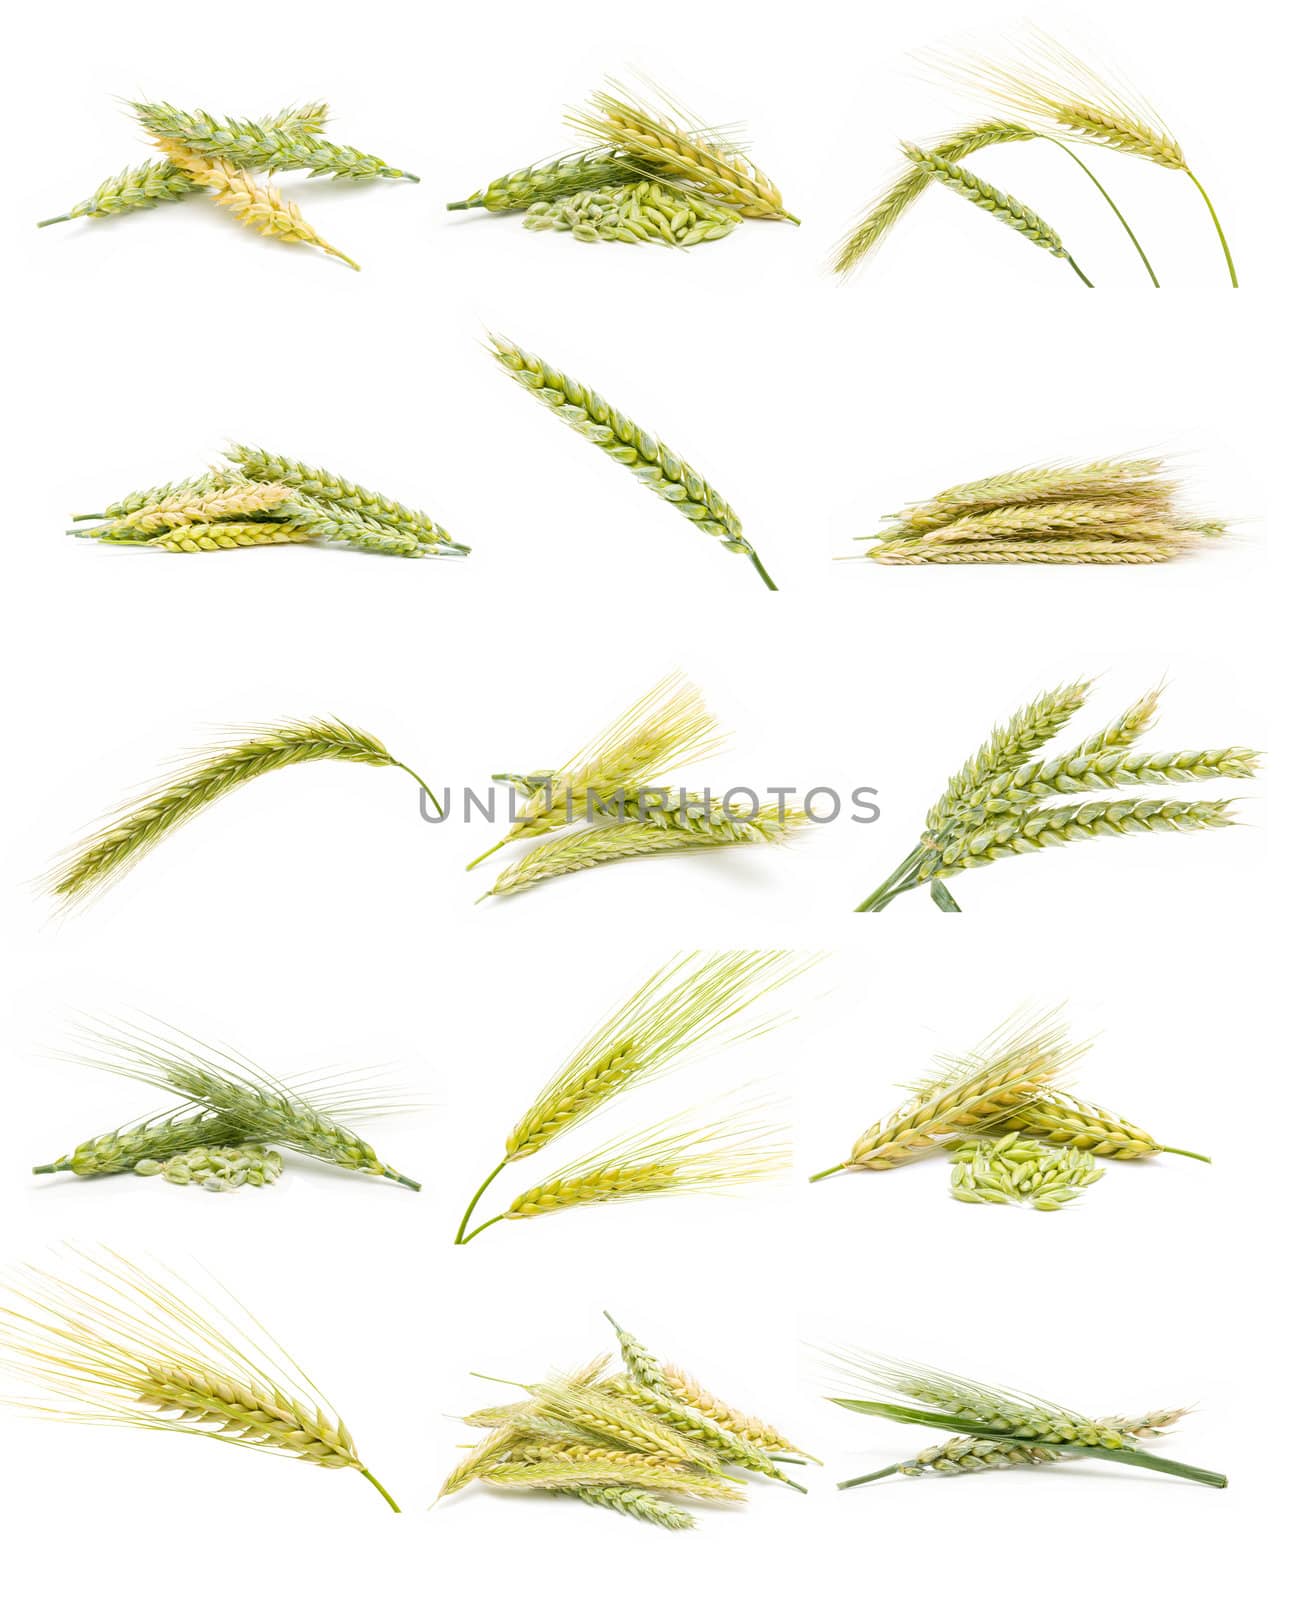 ears of grain collection isolated on white background
